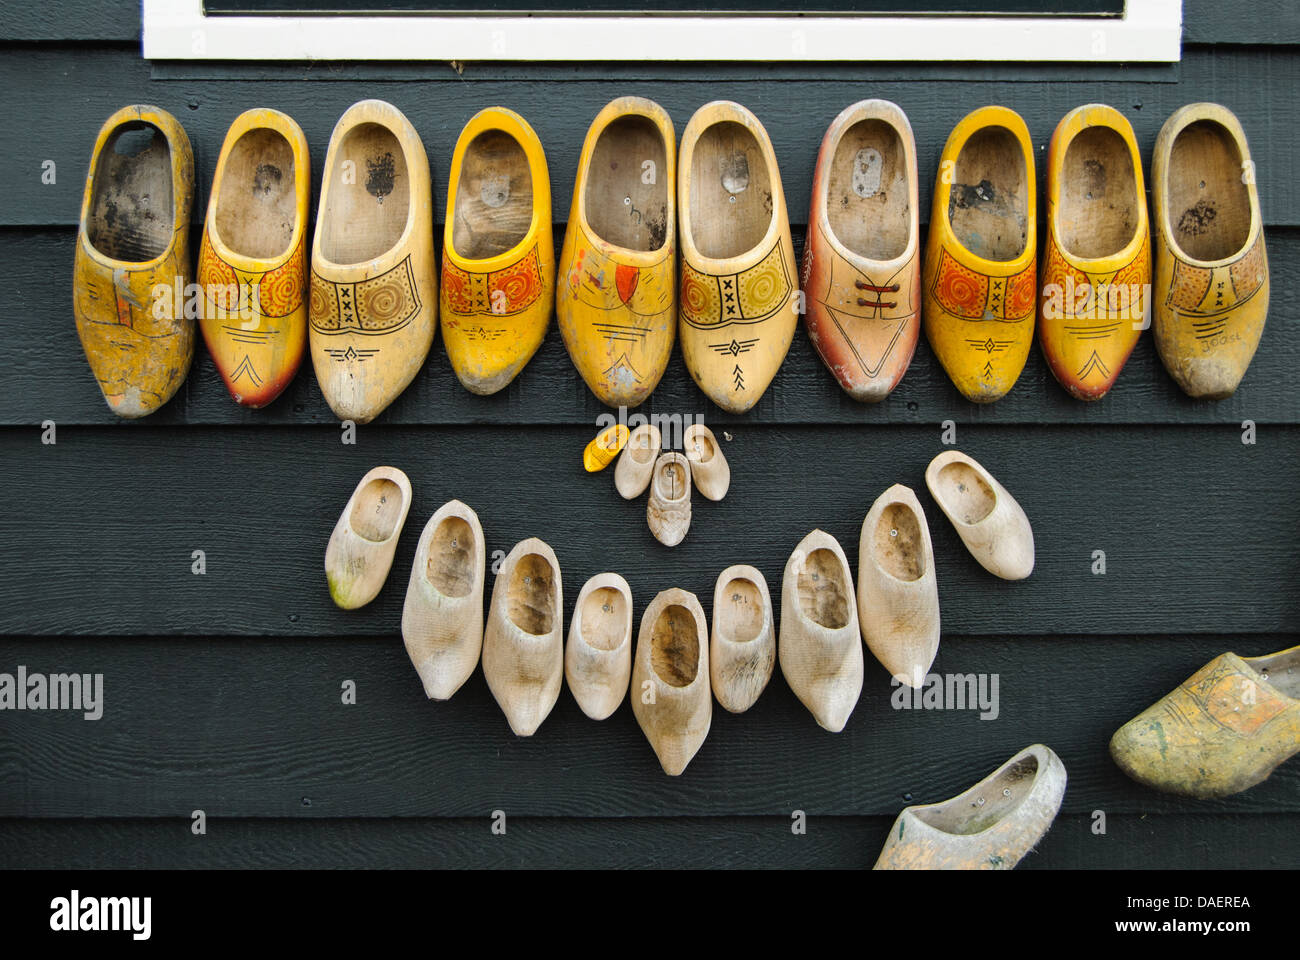 Used Dutch clogs or klompen were used to decorate a house wall. Stock Photo